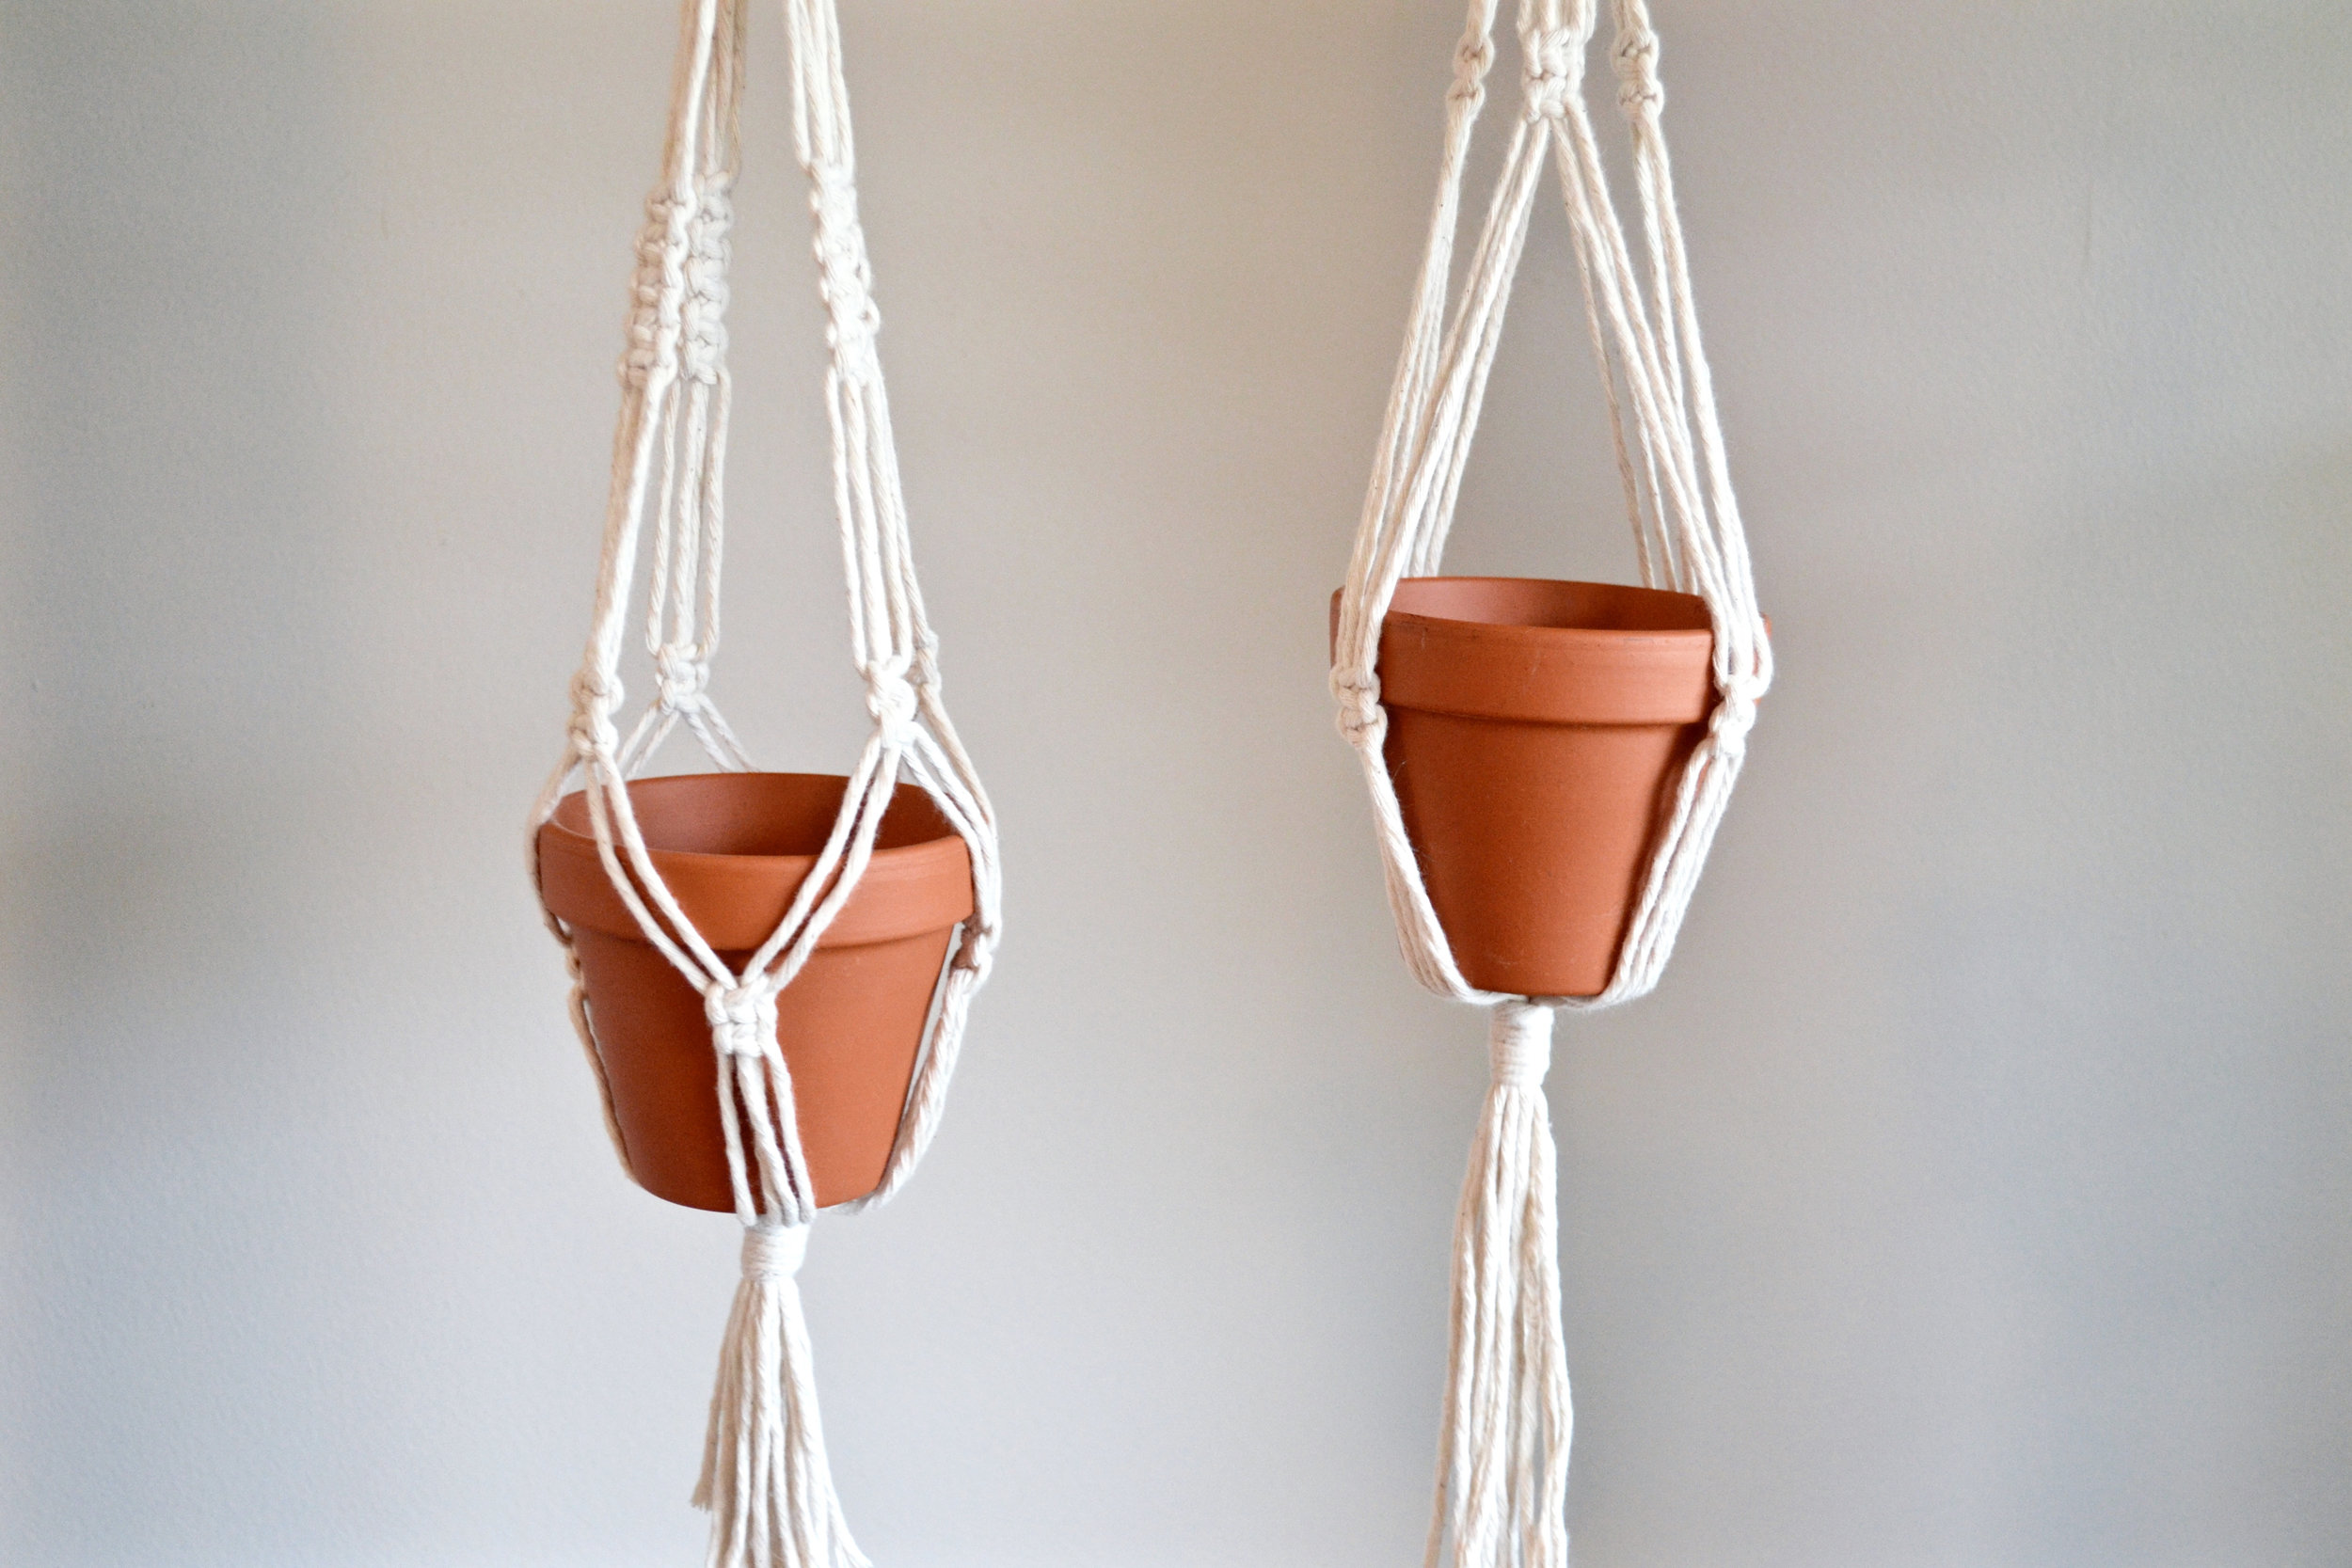  Small minimalist plant hangers - 14 inches long - available for purchase! (made to order) 